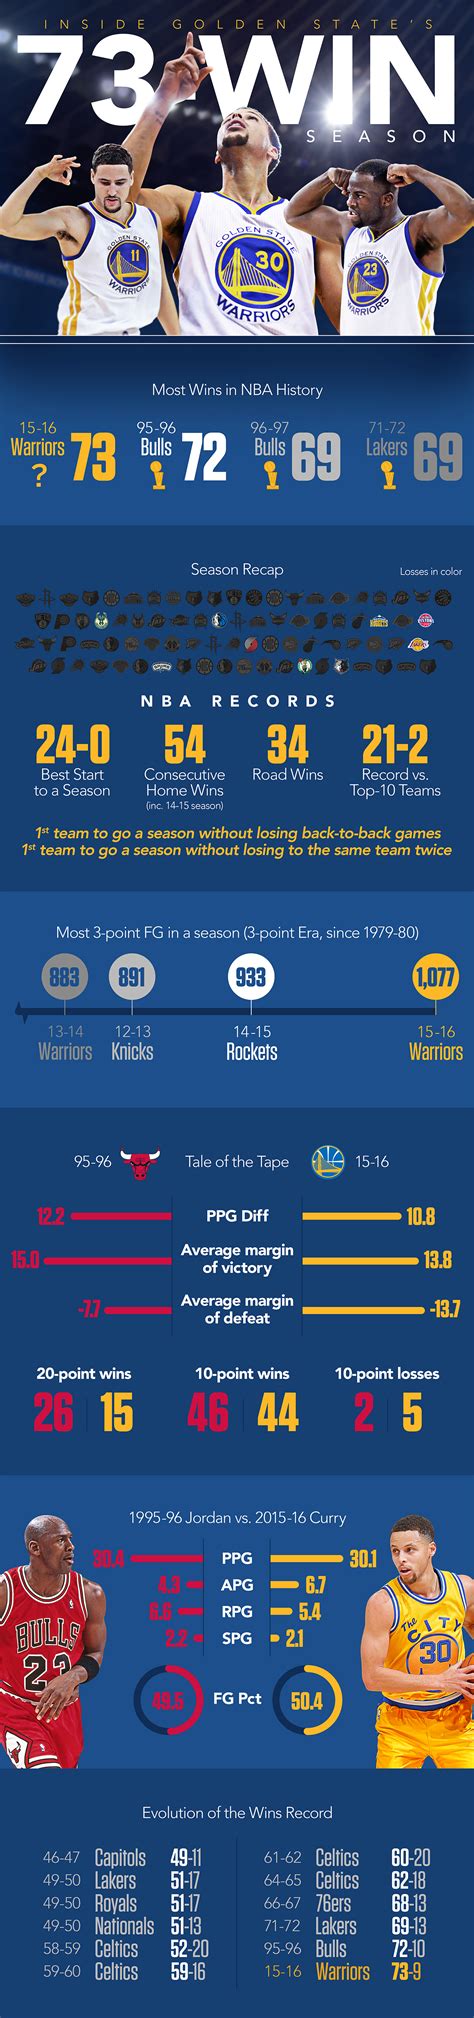 Golden state warriors statistics. Visit ESPN (PH) for Golden State Warriors live scores, video highlights, and latest news. Find standings and the full 2023-24 season schedule. ... 2023-24 Team Stats. Points Per Game. 119.7. Rebounds Per Game. 46.6. Assists Per Game. 29.0. Full Team Stats. Injuries. Chris Paul PG #3. Out. Team Injuries. 2023 Draft Picks. RD(PK) PLAYER POS 